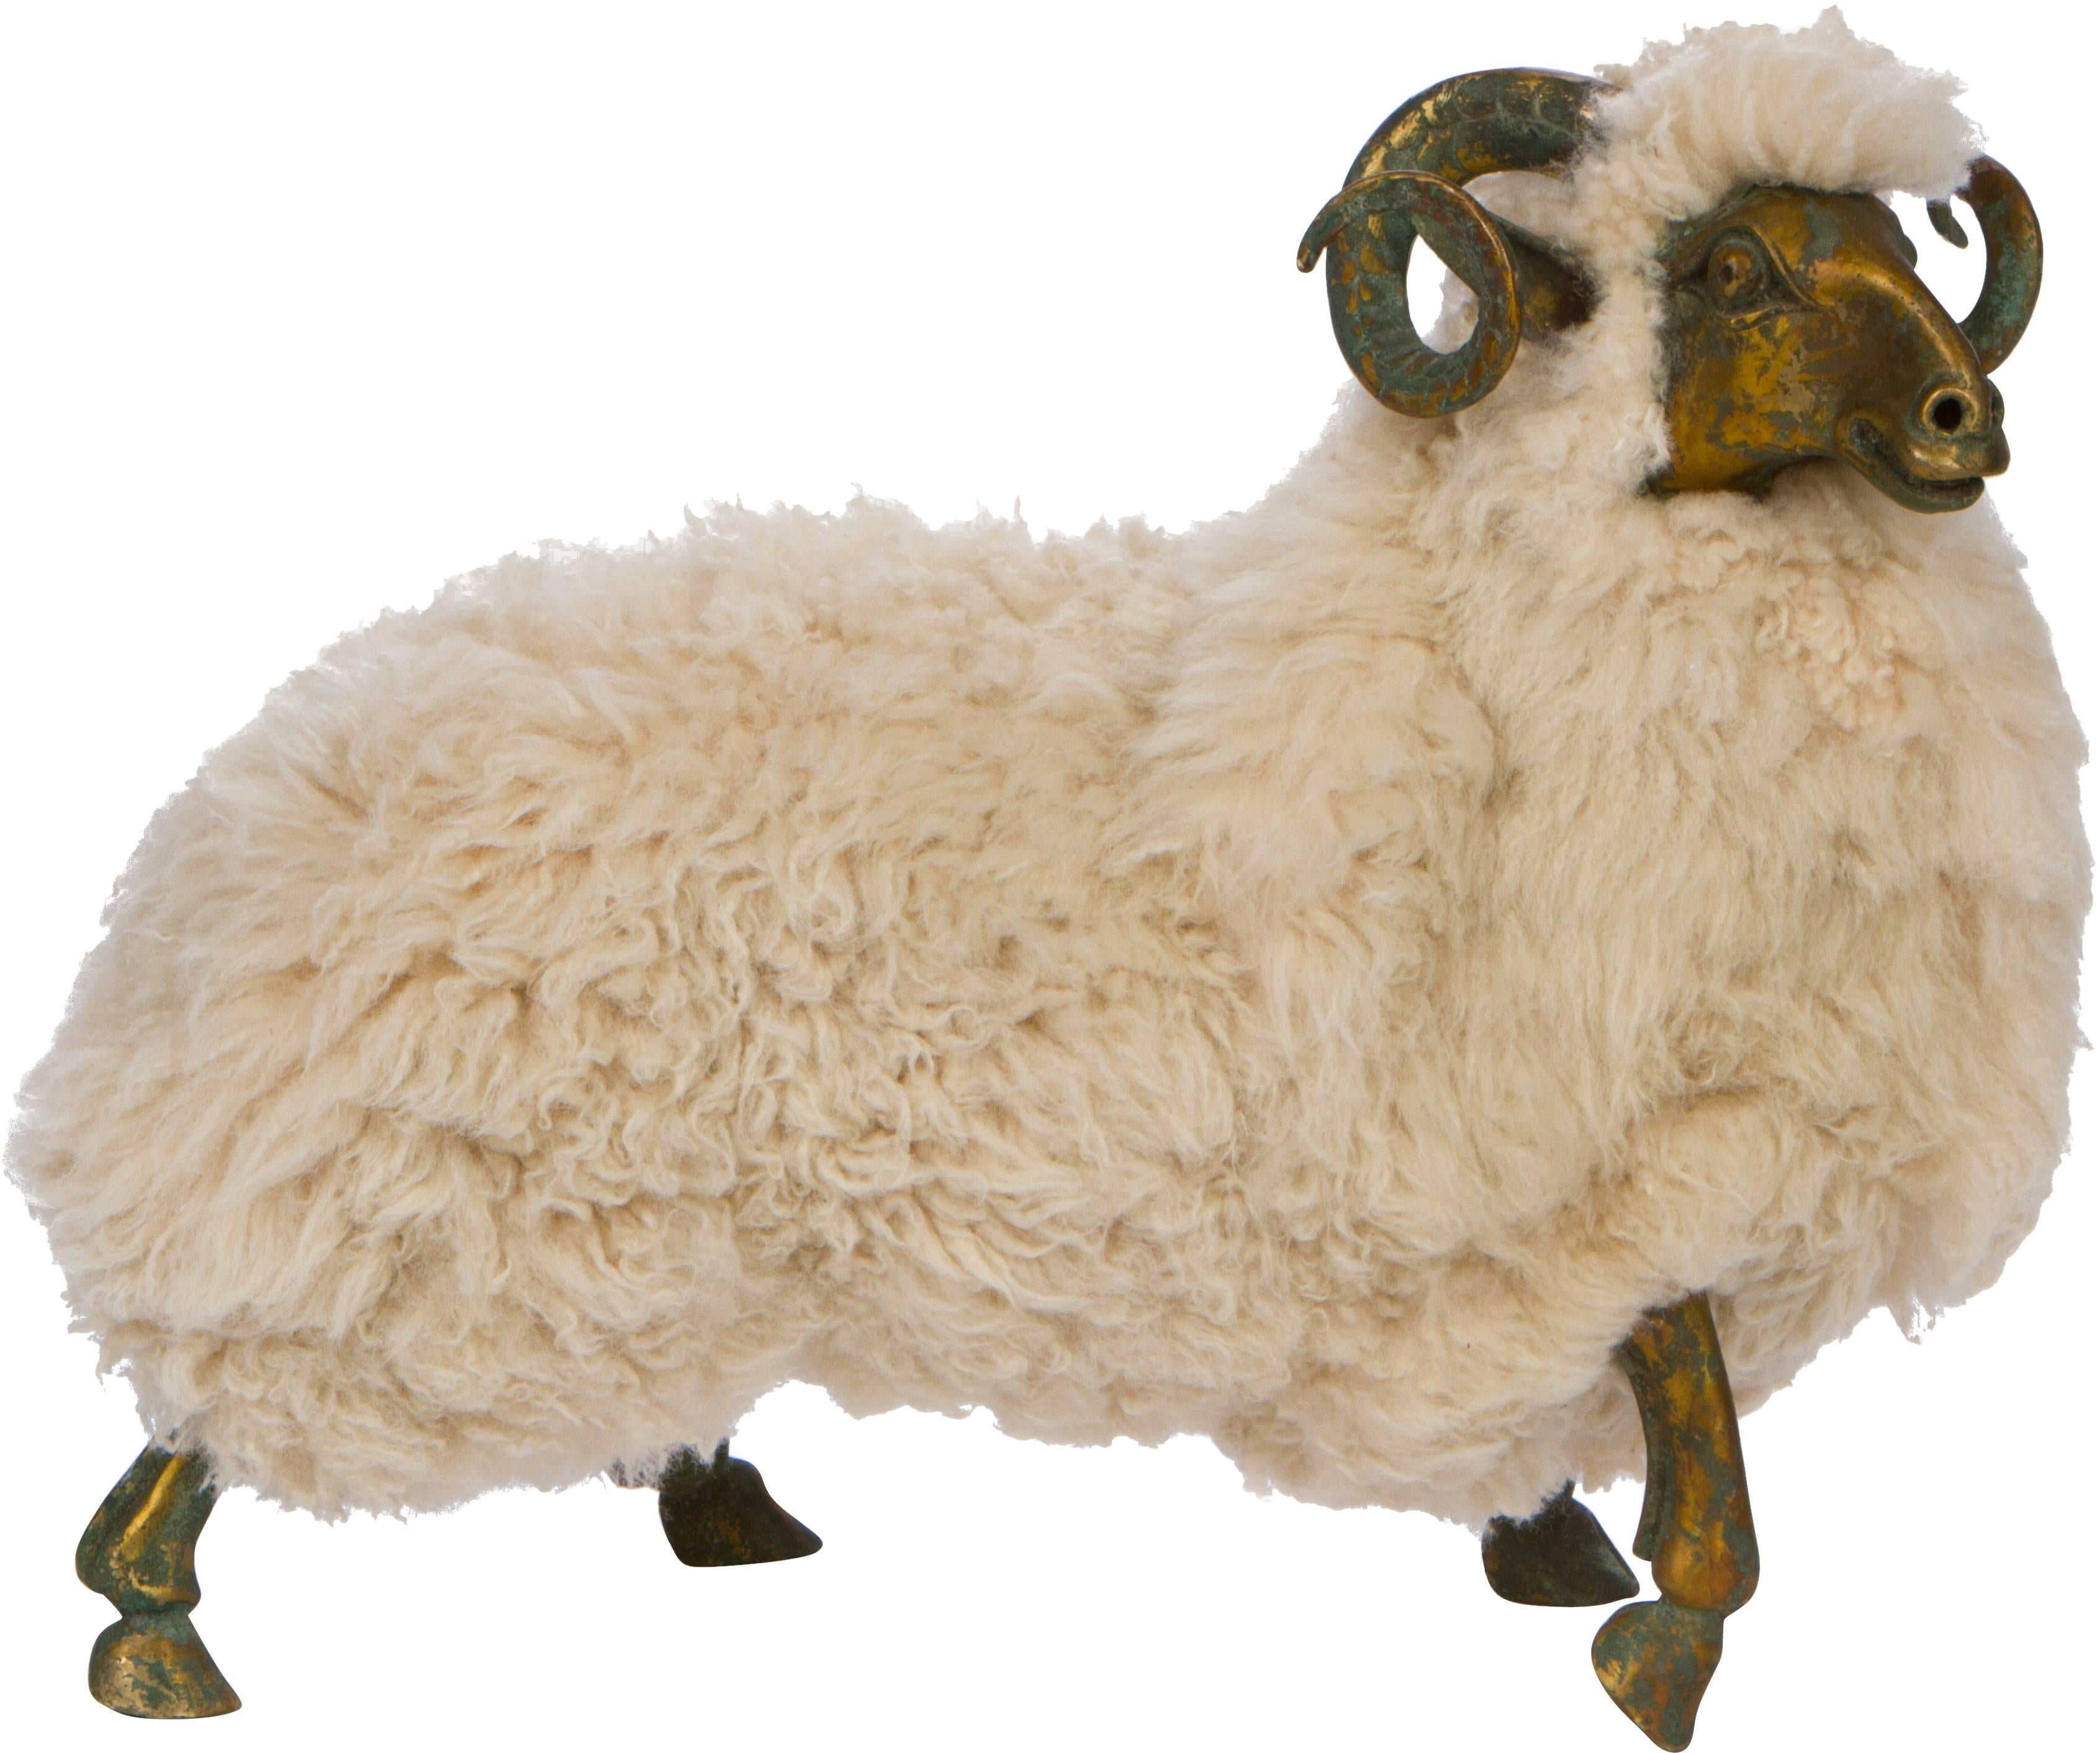 Whimsical, yet sophisticated, pair of sheep likely French, 20th century. Constructed of bronze and wool fur, the sheep are in excellent condition.
Third identical sheep is available. 